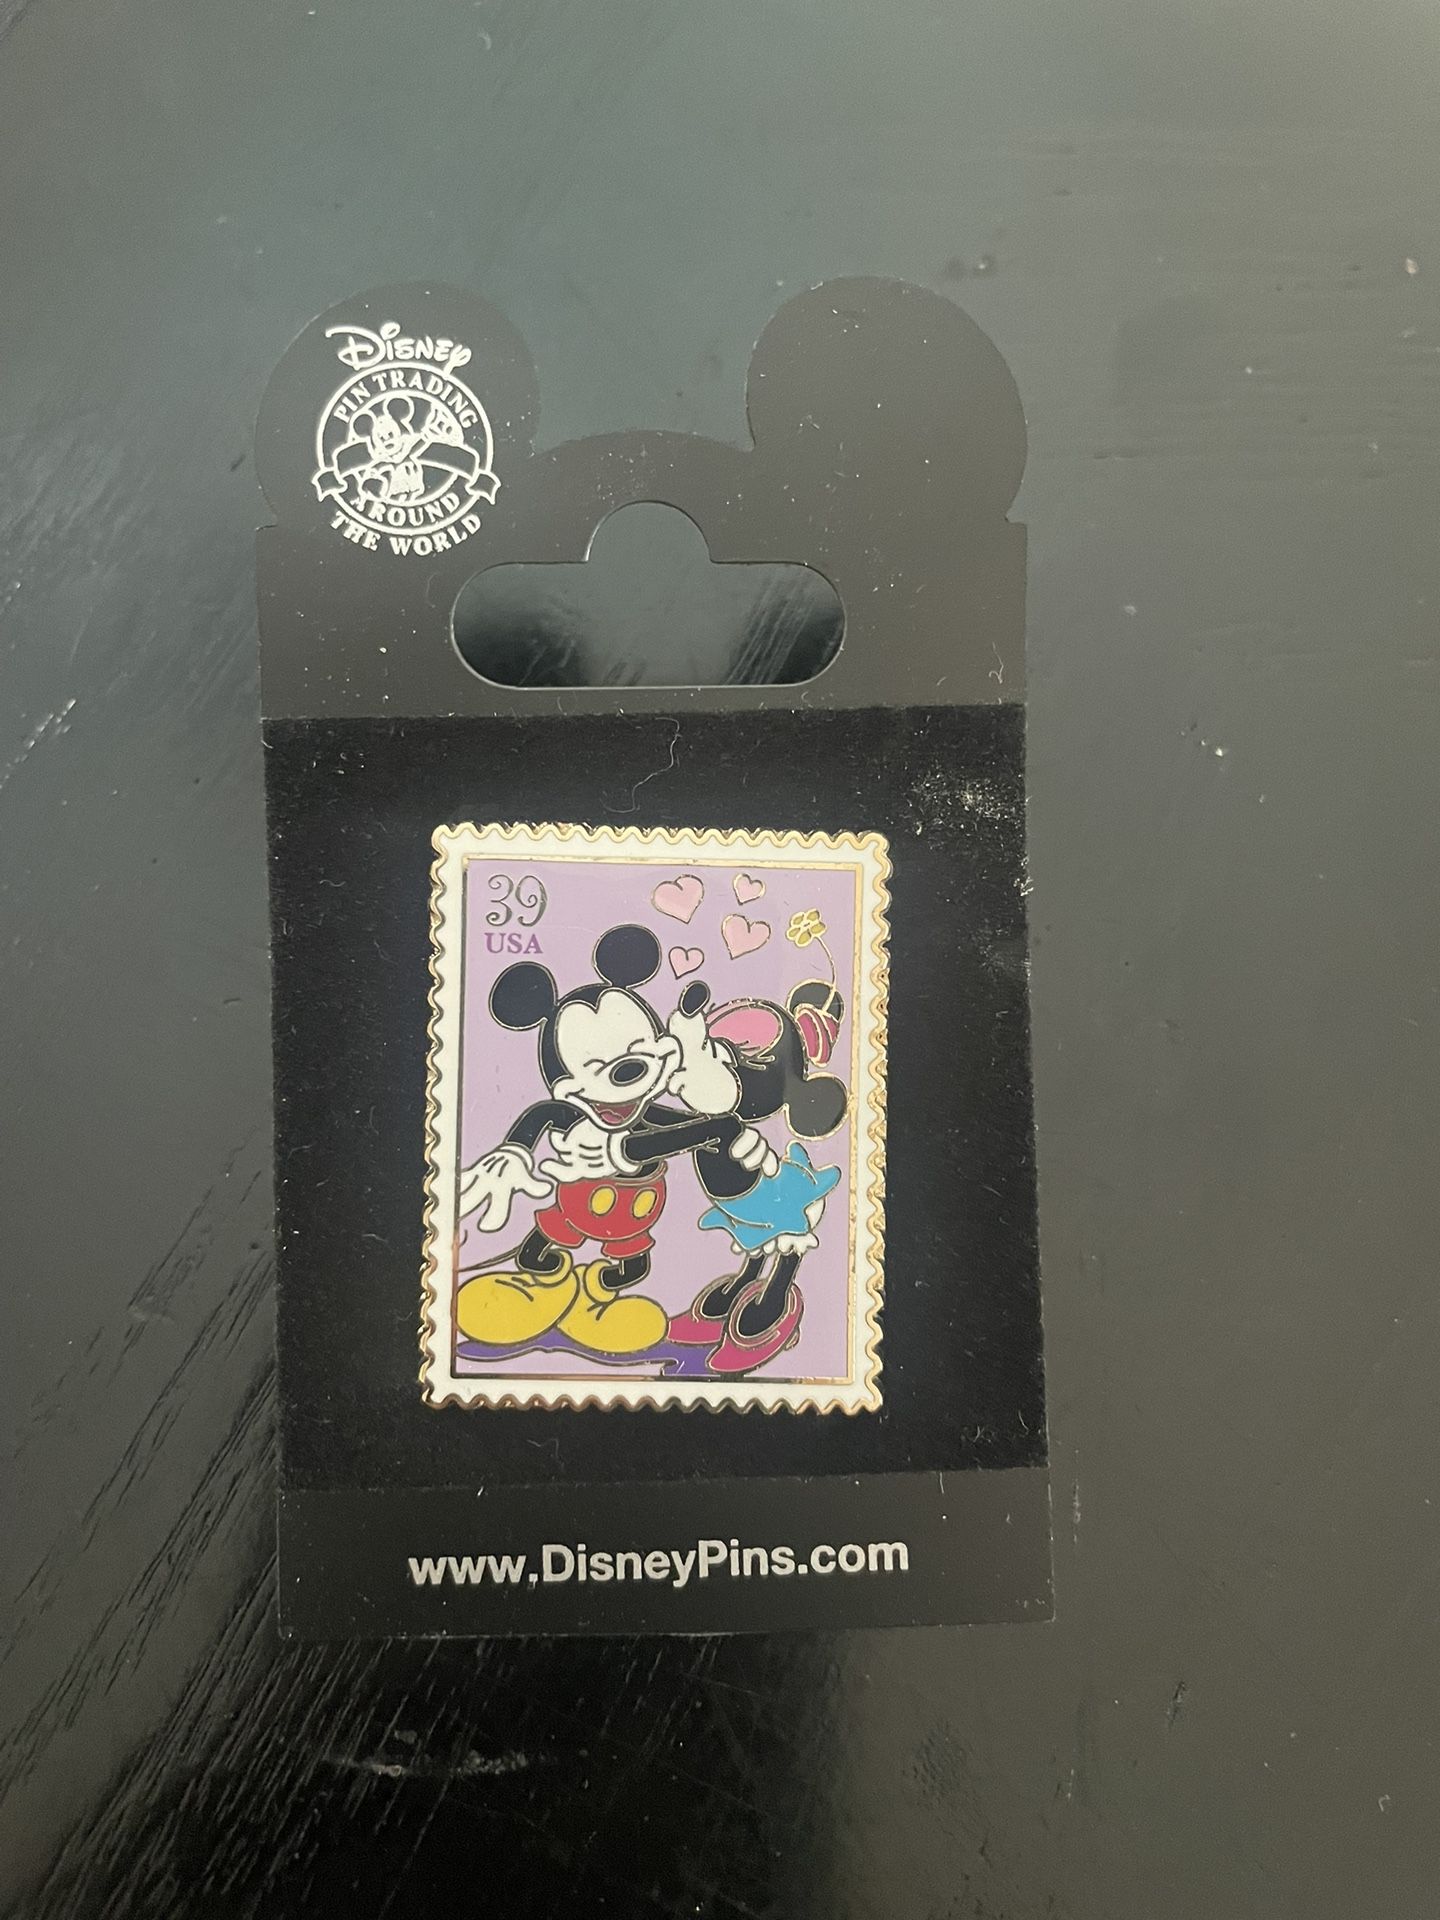 USPS 39 USA Stamp Art of Romance Mickey and Minnie Mouse Disney Pin 46490